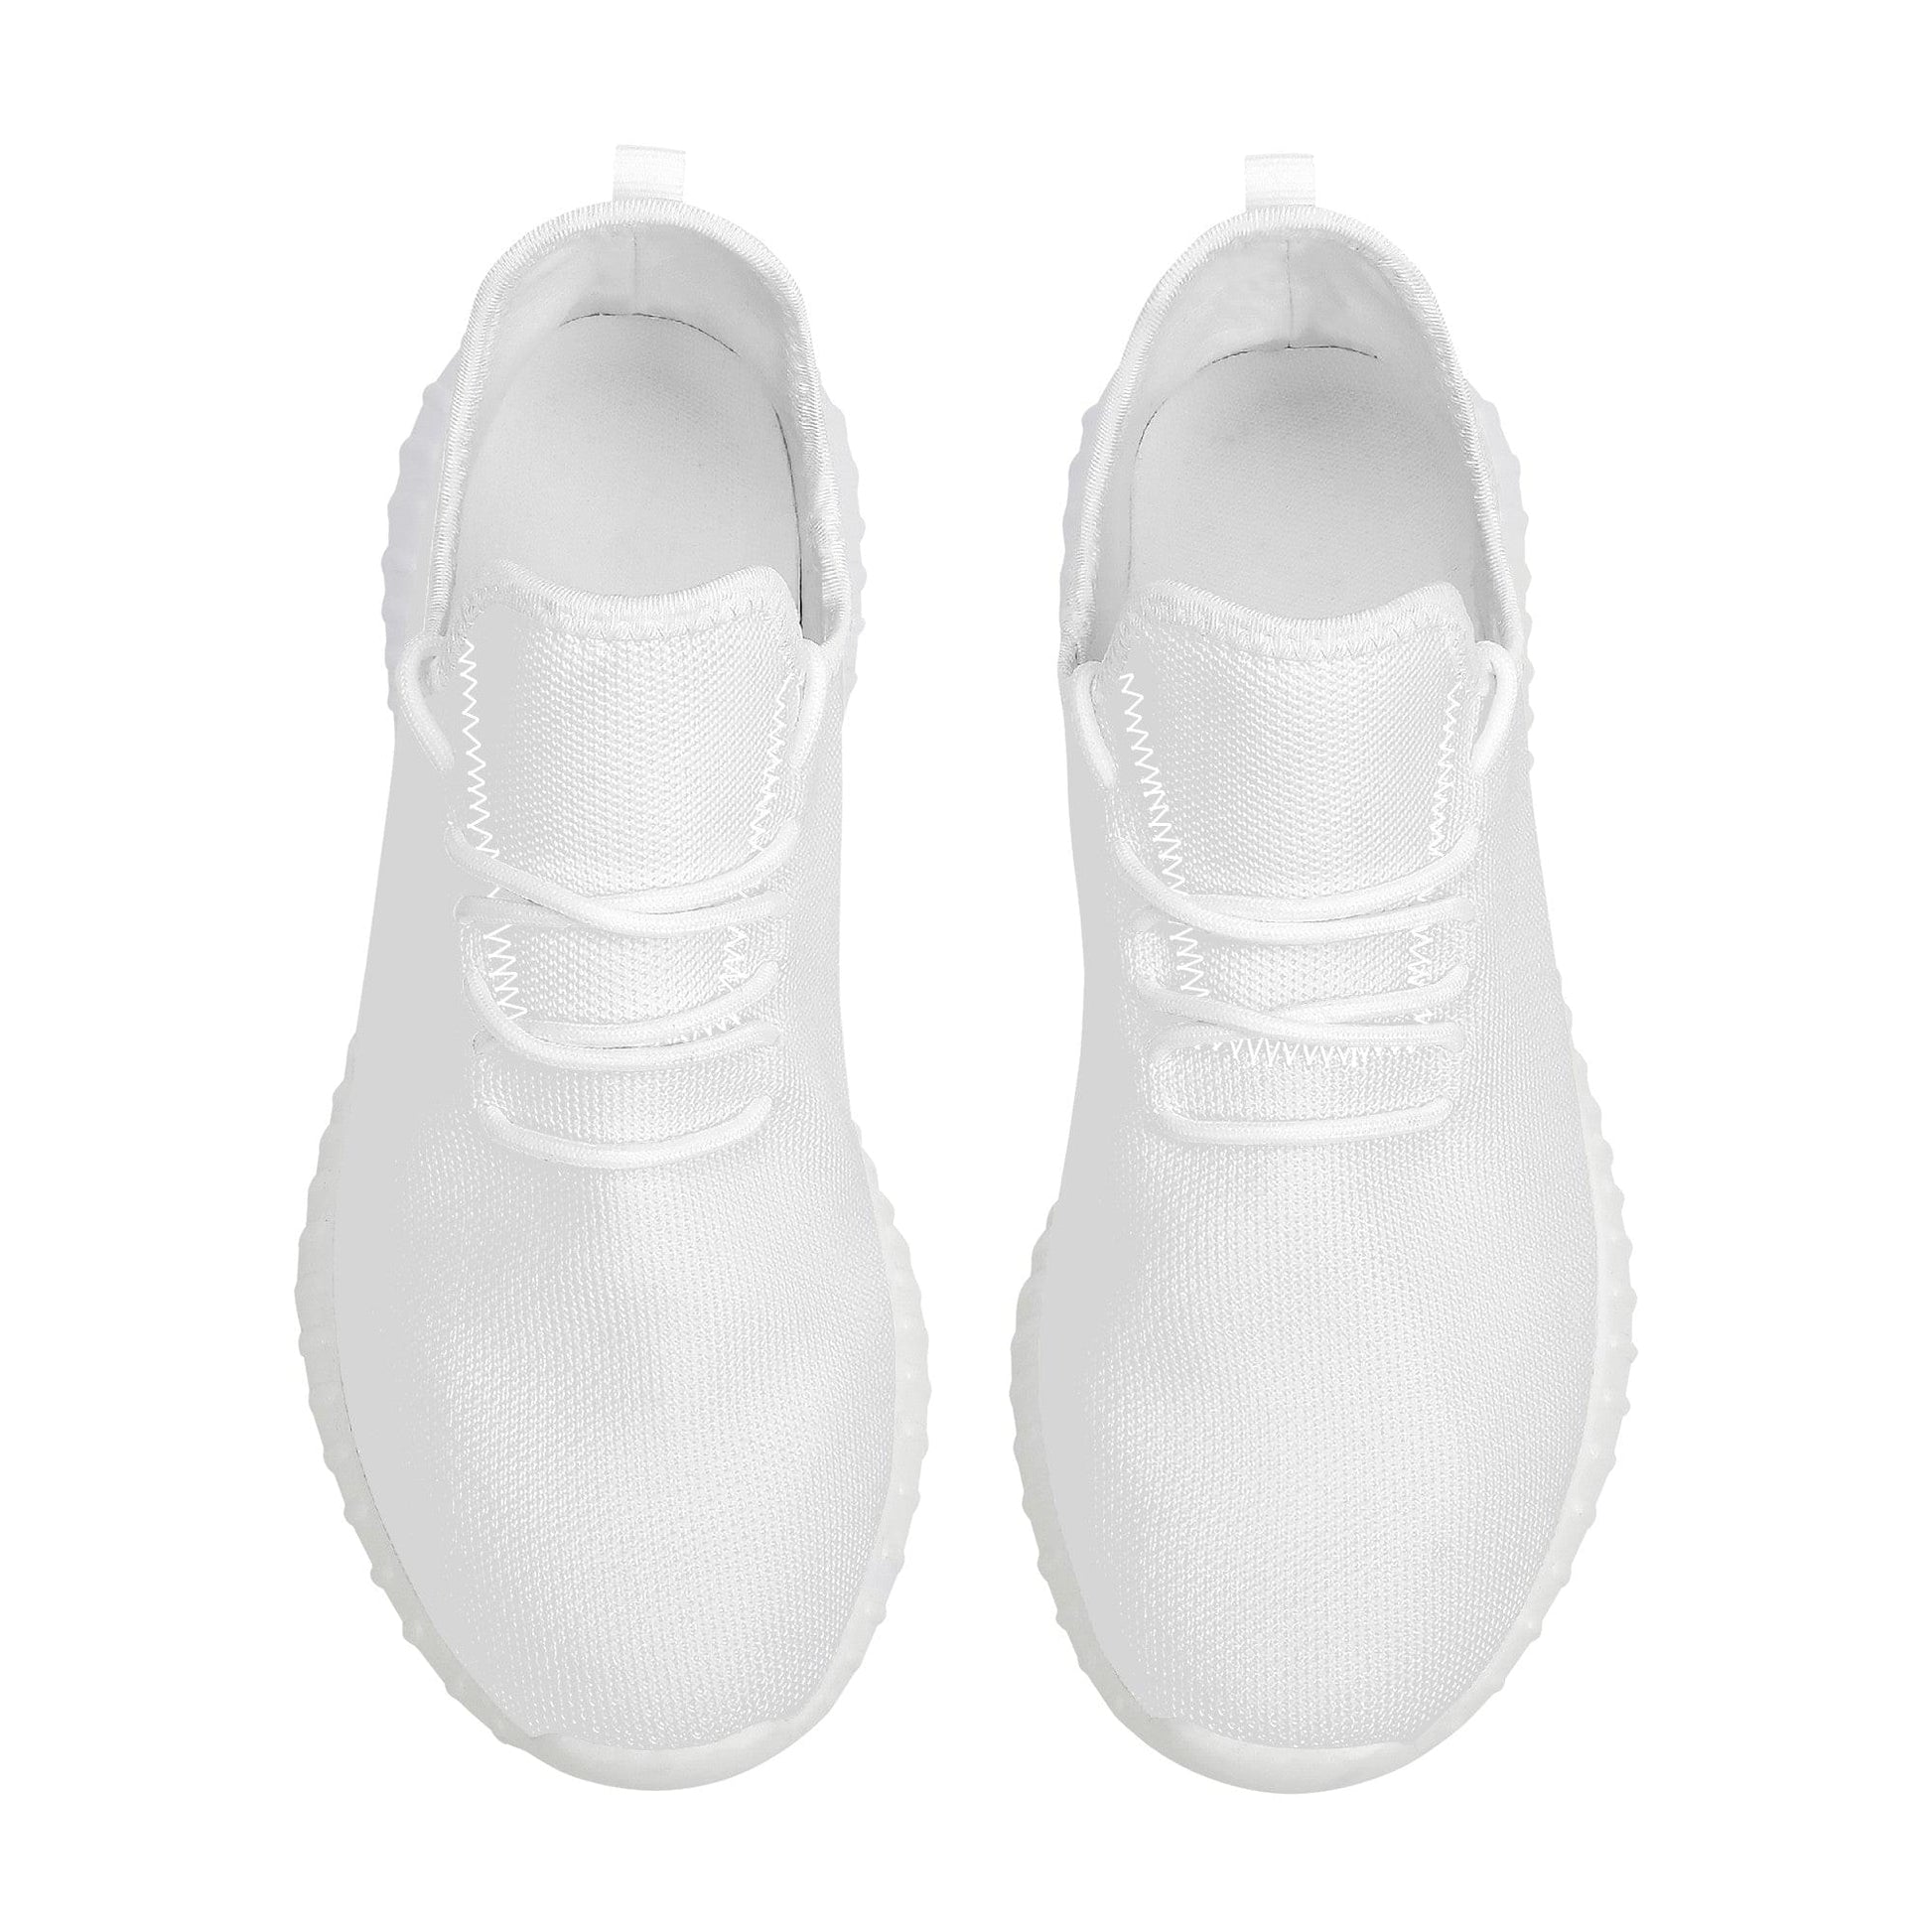 Custom Casual Sneakers -White D19 Mesh Knit Colloid Colors 